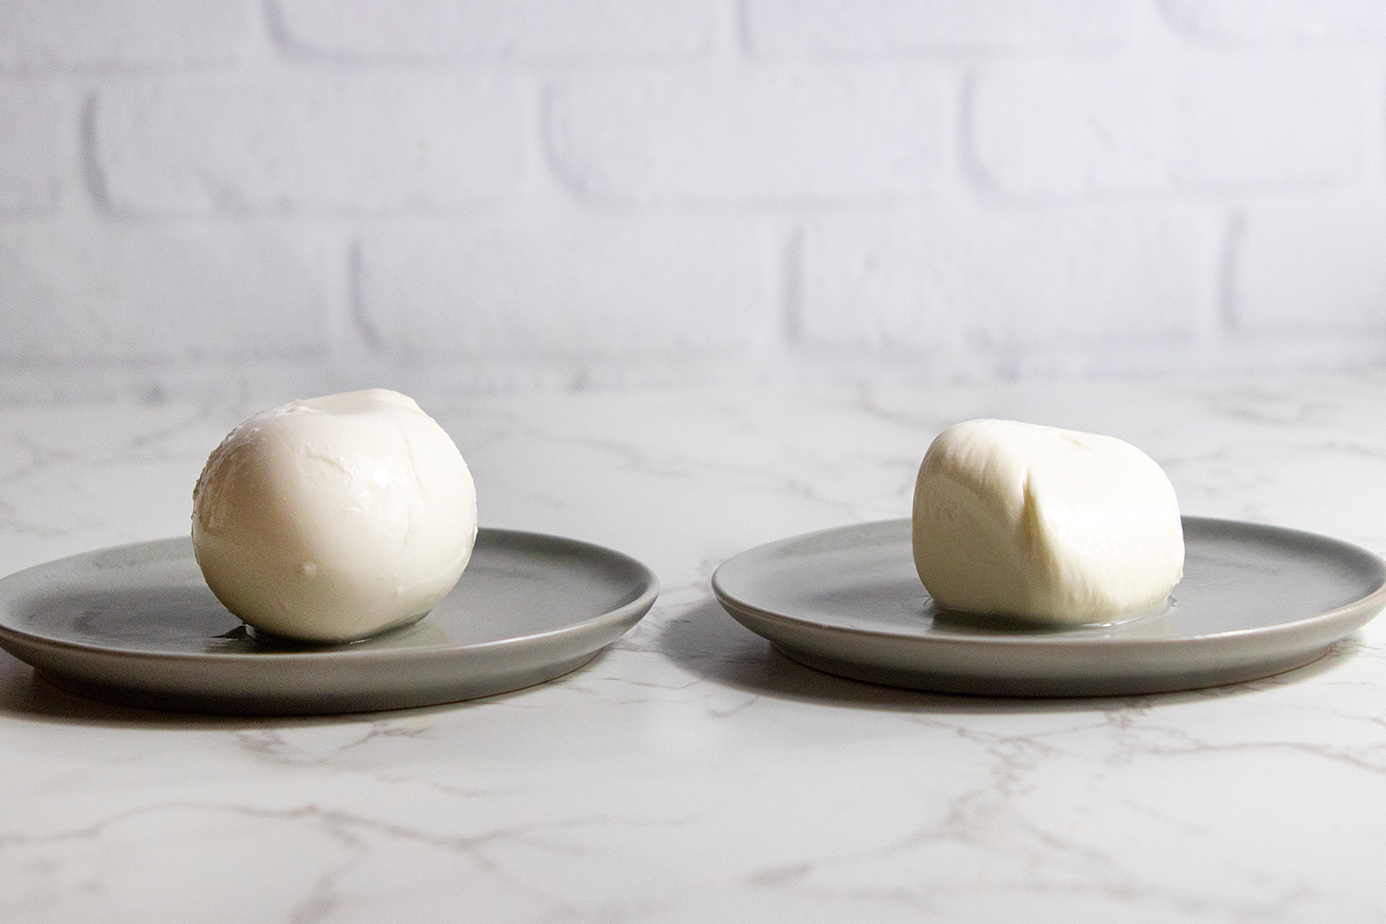 The Difference Between Mozzarella And Burrata